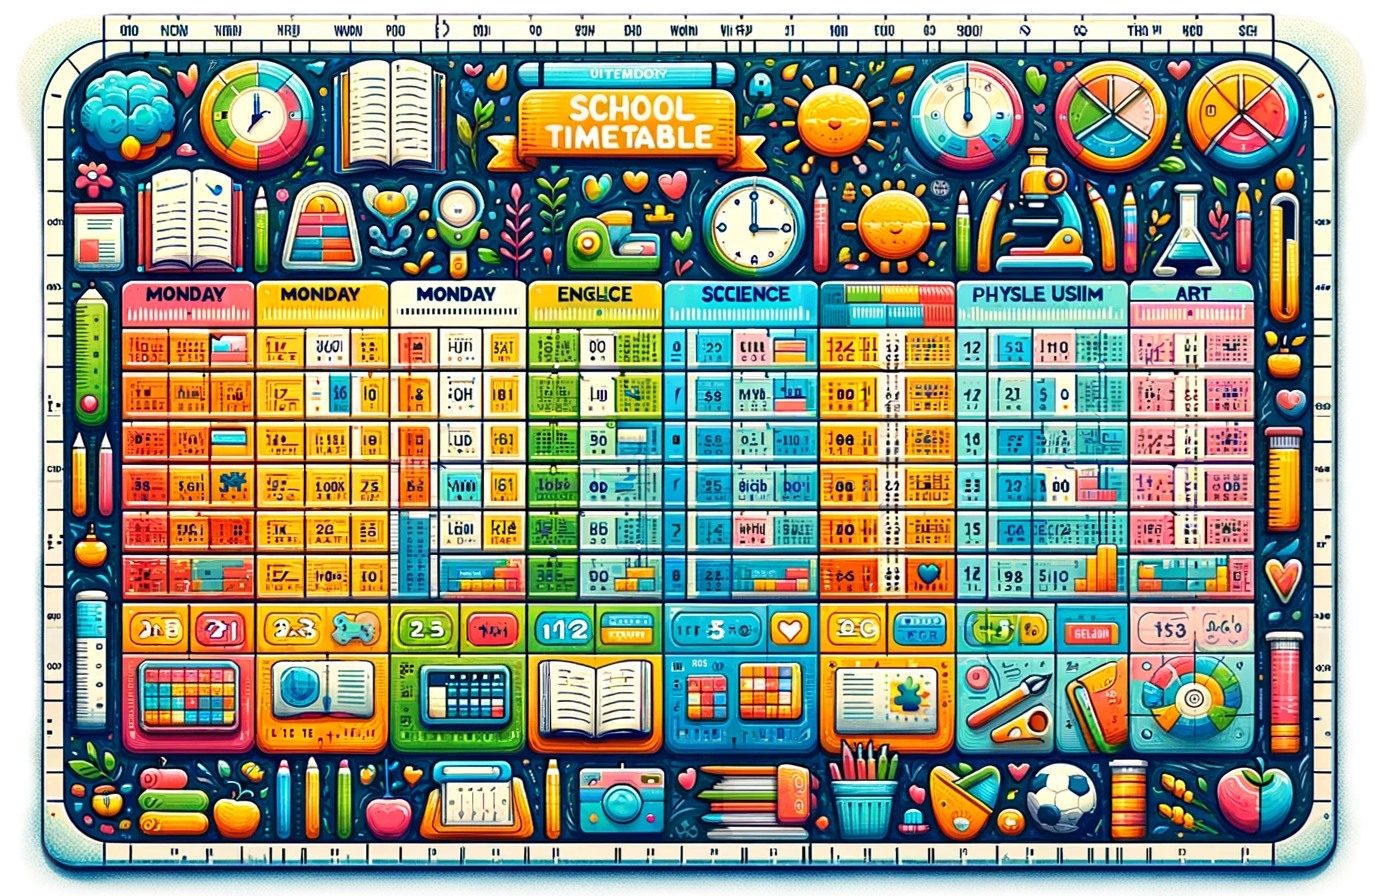 wide-format, colorful school timetable illustration, tailored for elementary students. The timetable displays a clean, horizontal layout with the days of the week from Monday to Friday shown prominently.